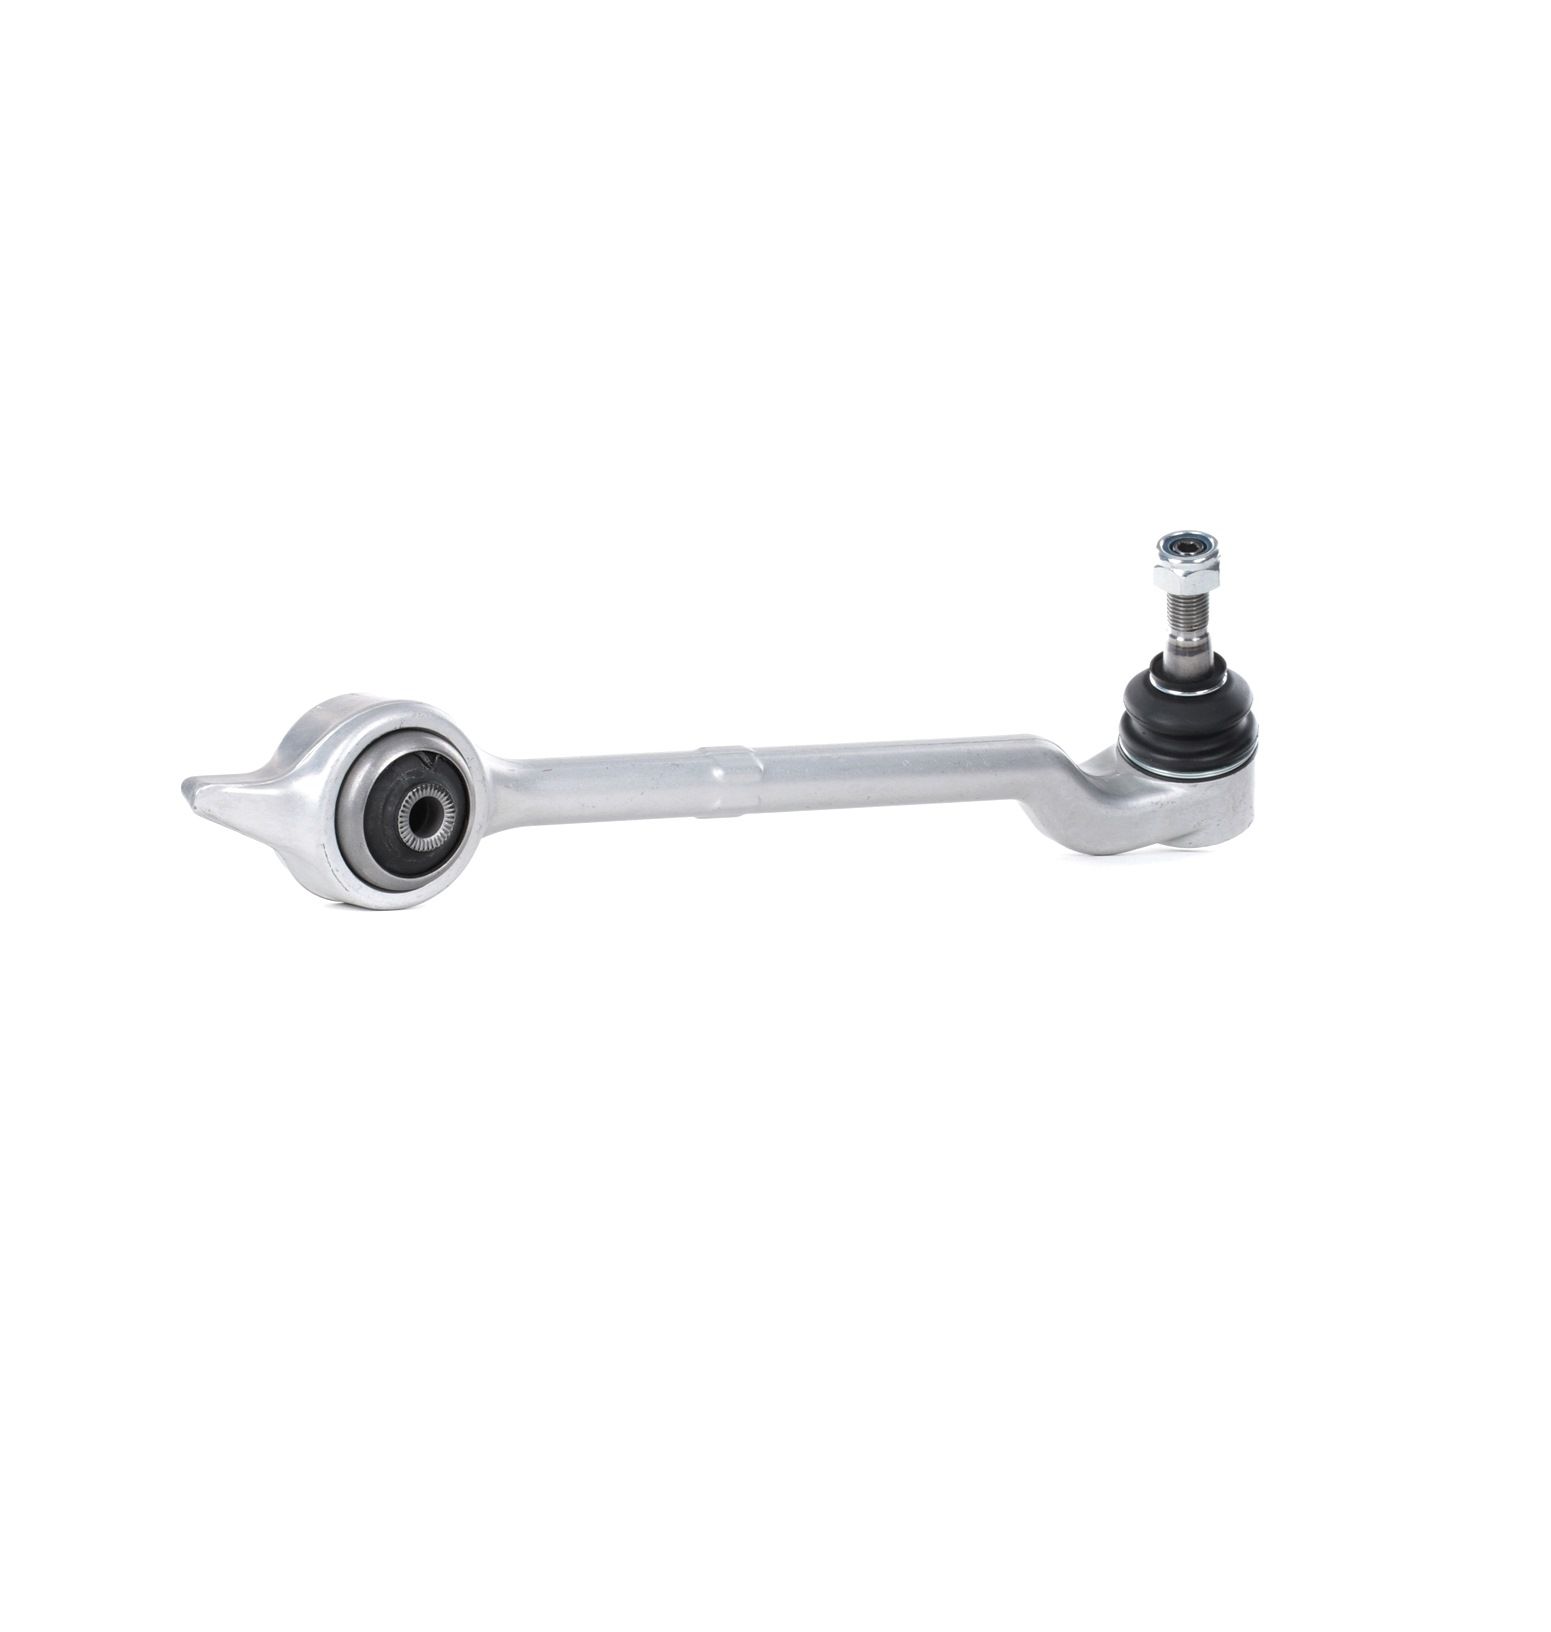 STARK SKCA-0050023 Suspension arm with rubber mount, Front Axle, Lower, Right, Rear, Control Arm, Aluminium, Cone Size: 14 mm